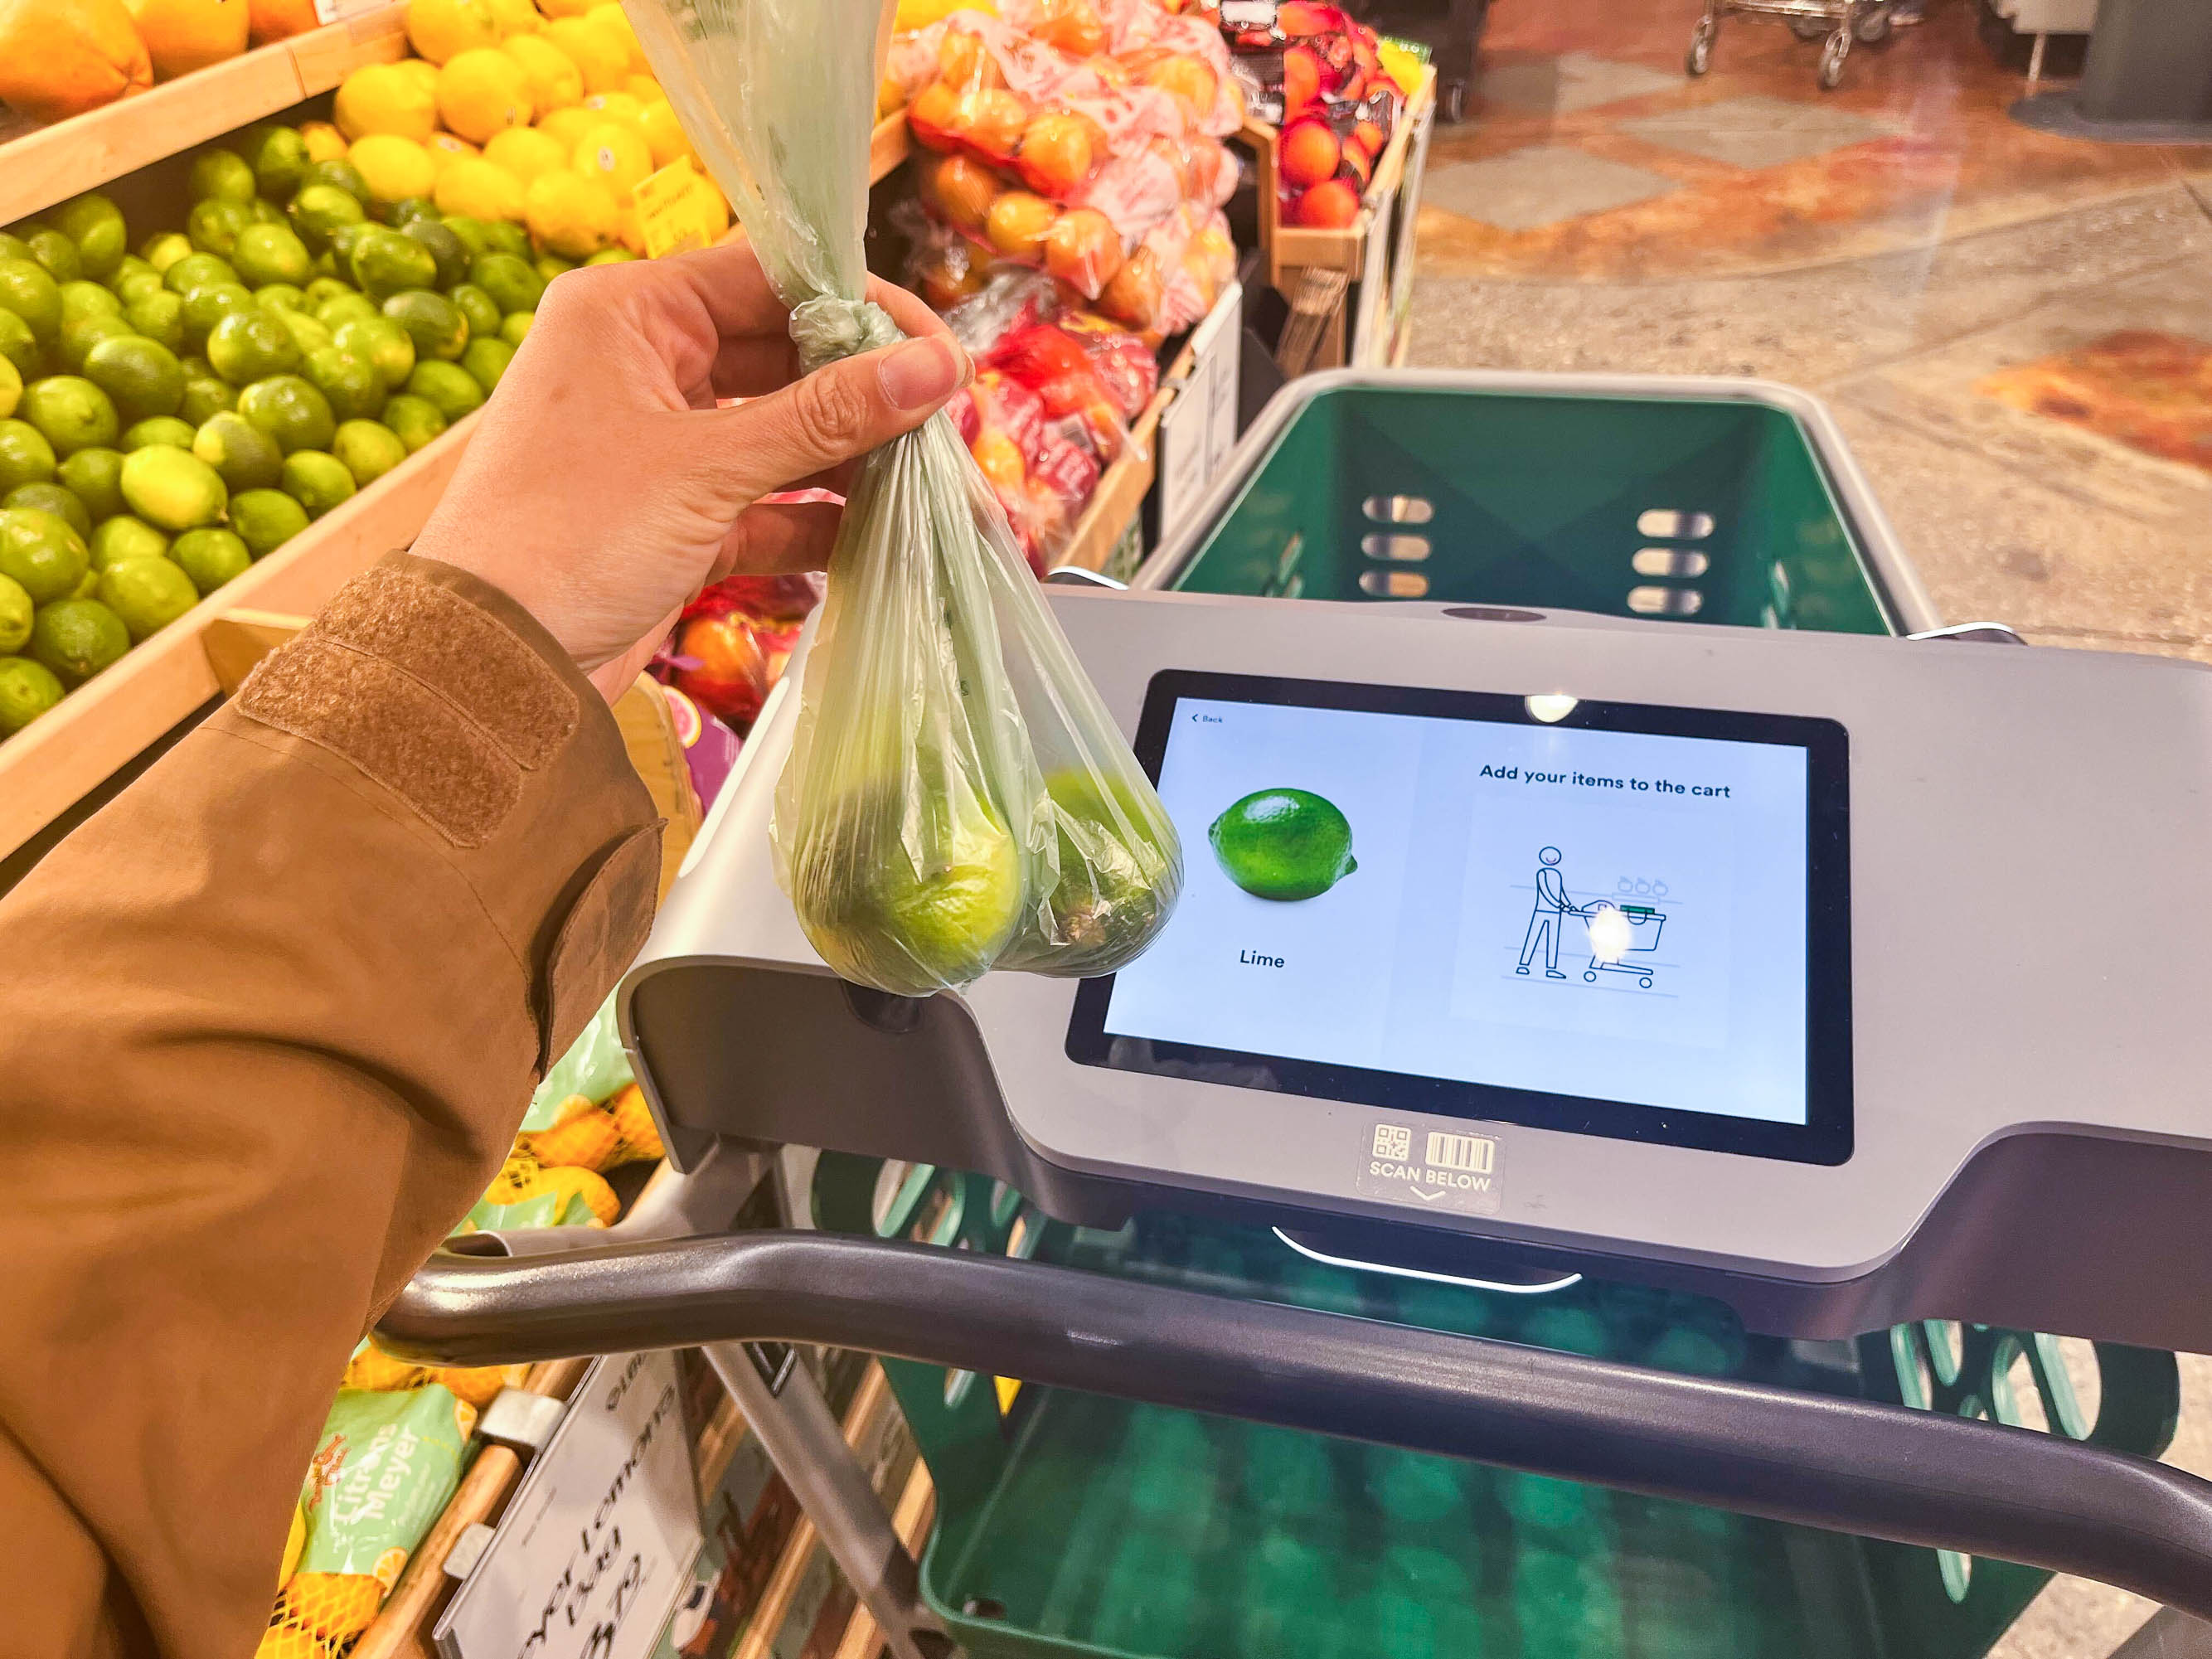 A hand holds a bag of limes over a shopping cart with a built-in screen displaying a lime image and "Add your items to the cart" text.